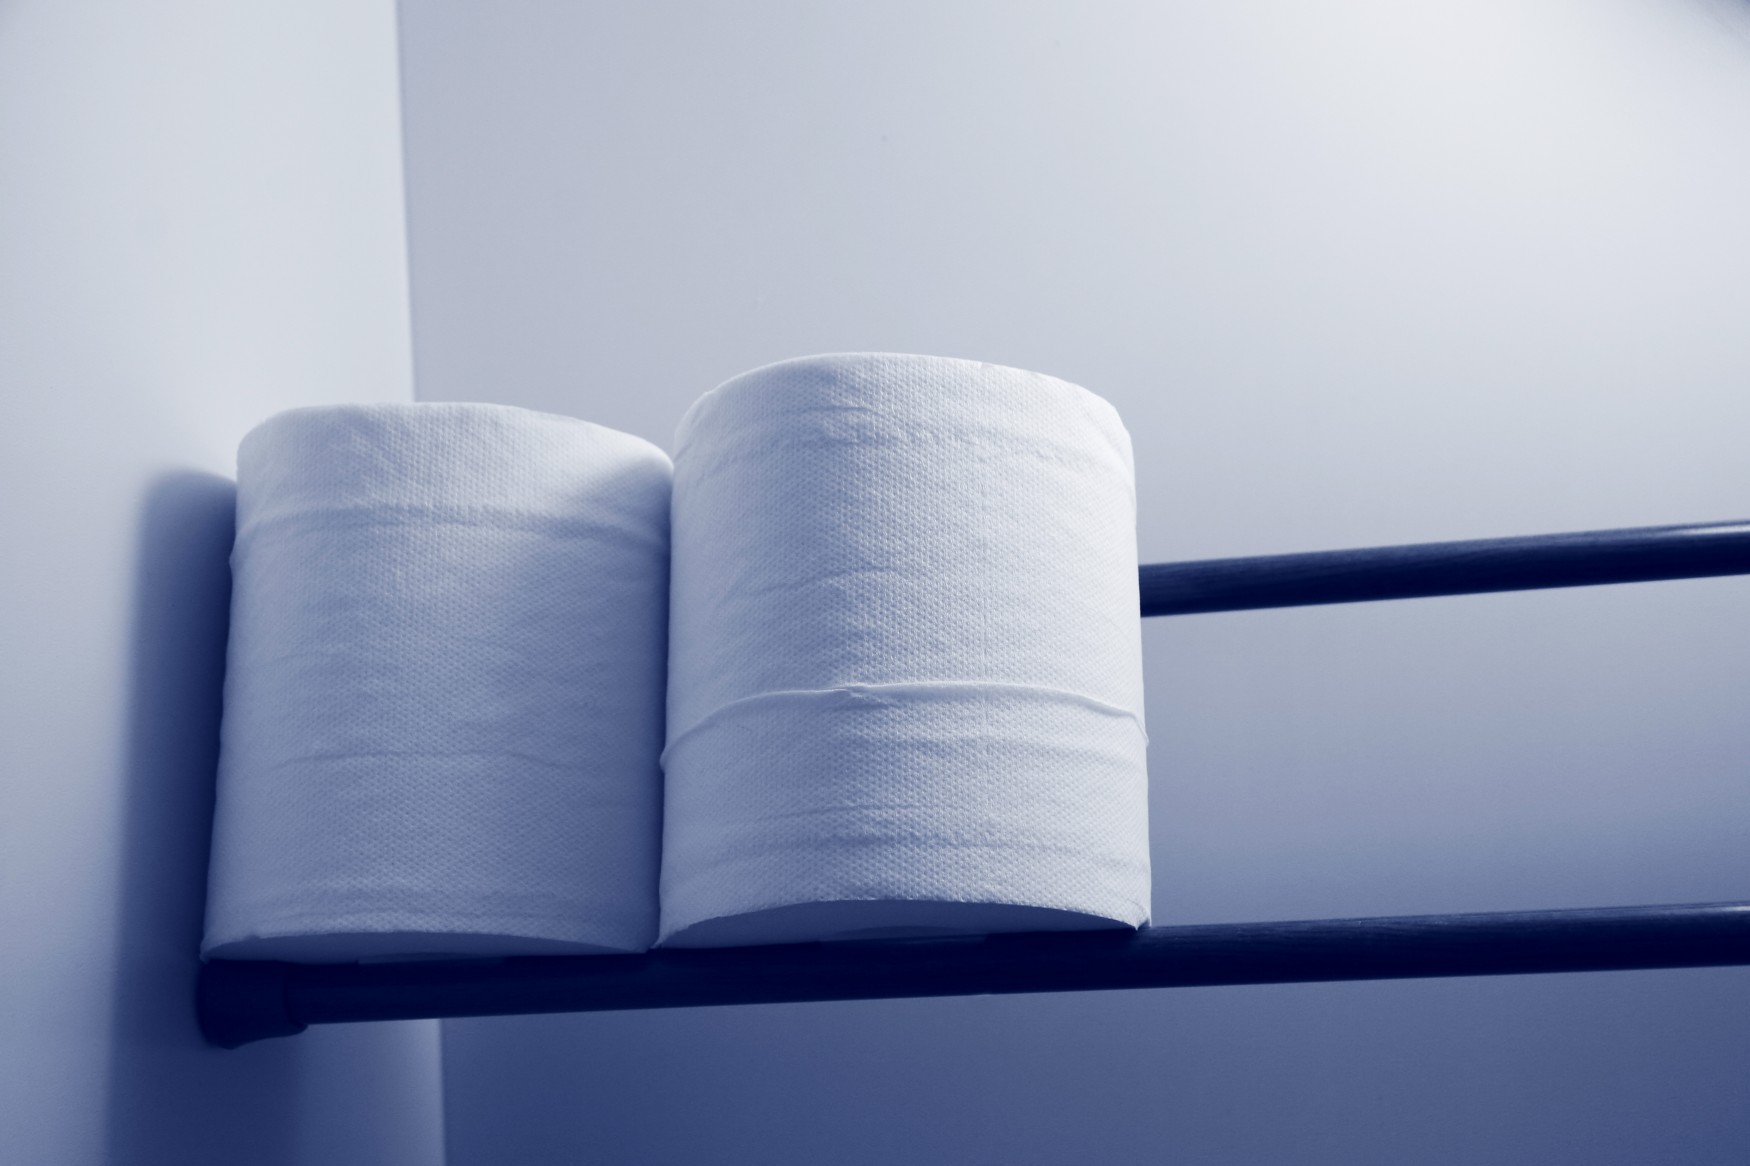 a pair of toilet paper rolls on a metal rack